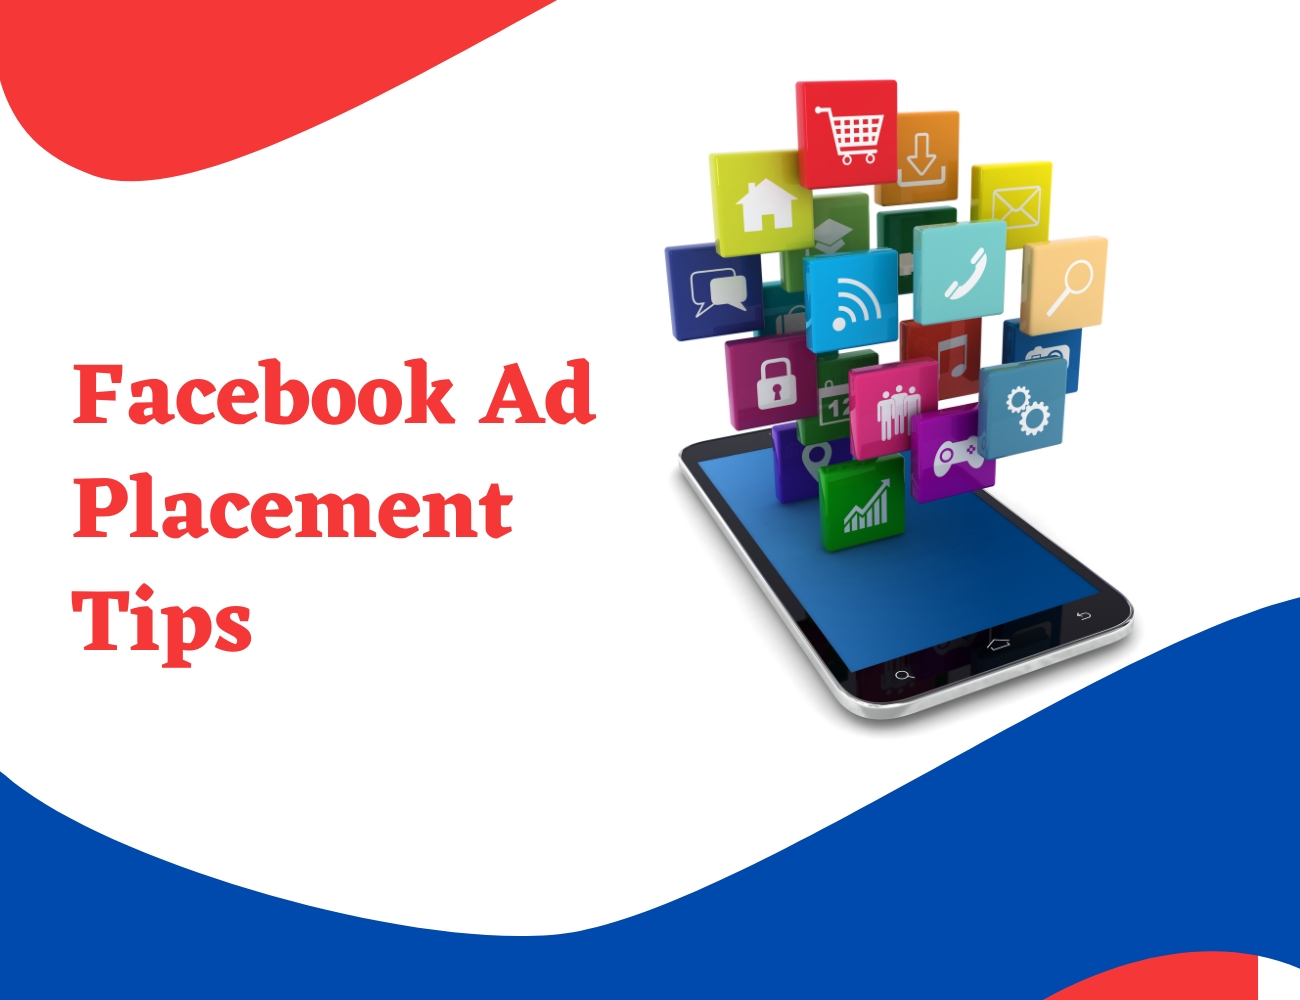 Facebook ad placement tips